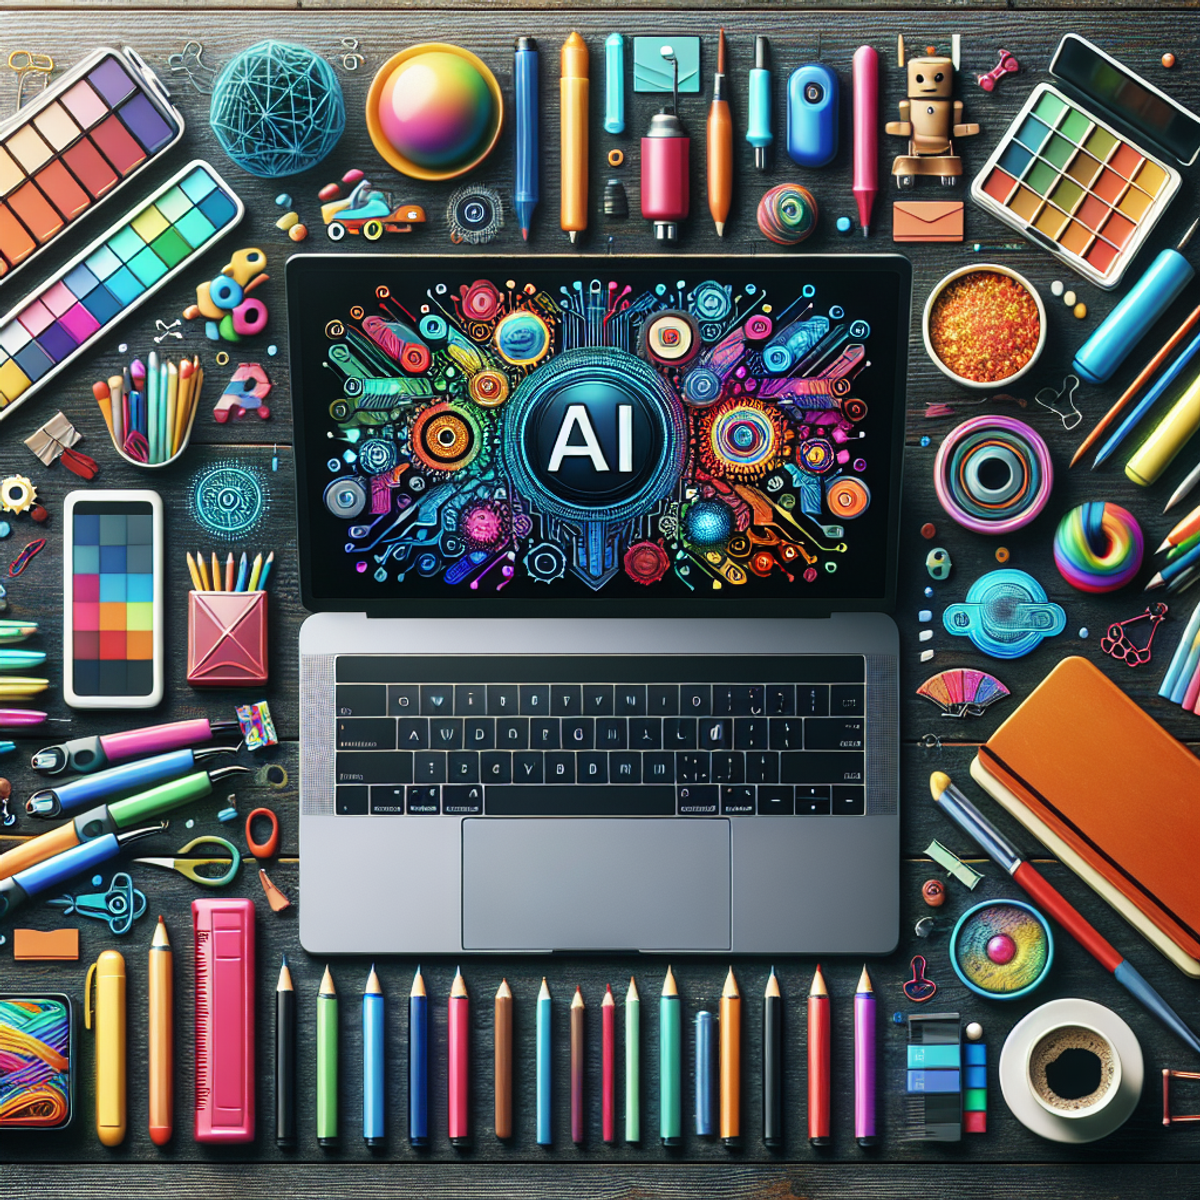 A modern laptop surrounded by an assortment of colorful pens, notebooks, and craft supplies.